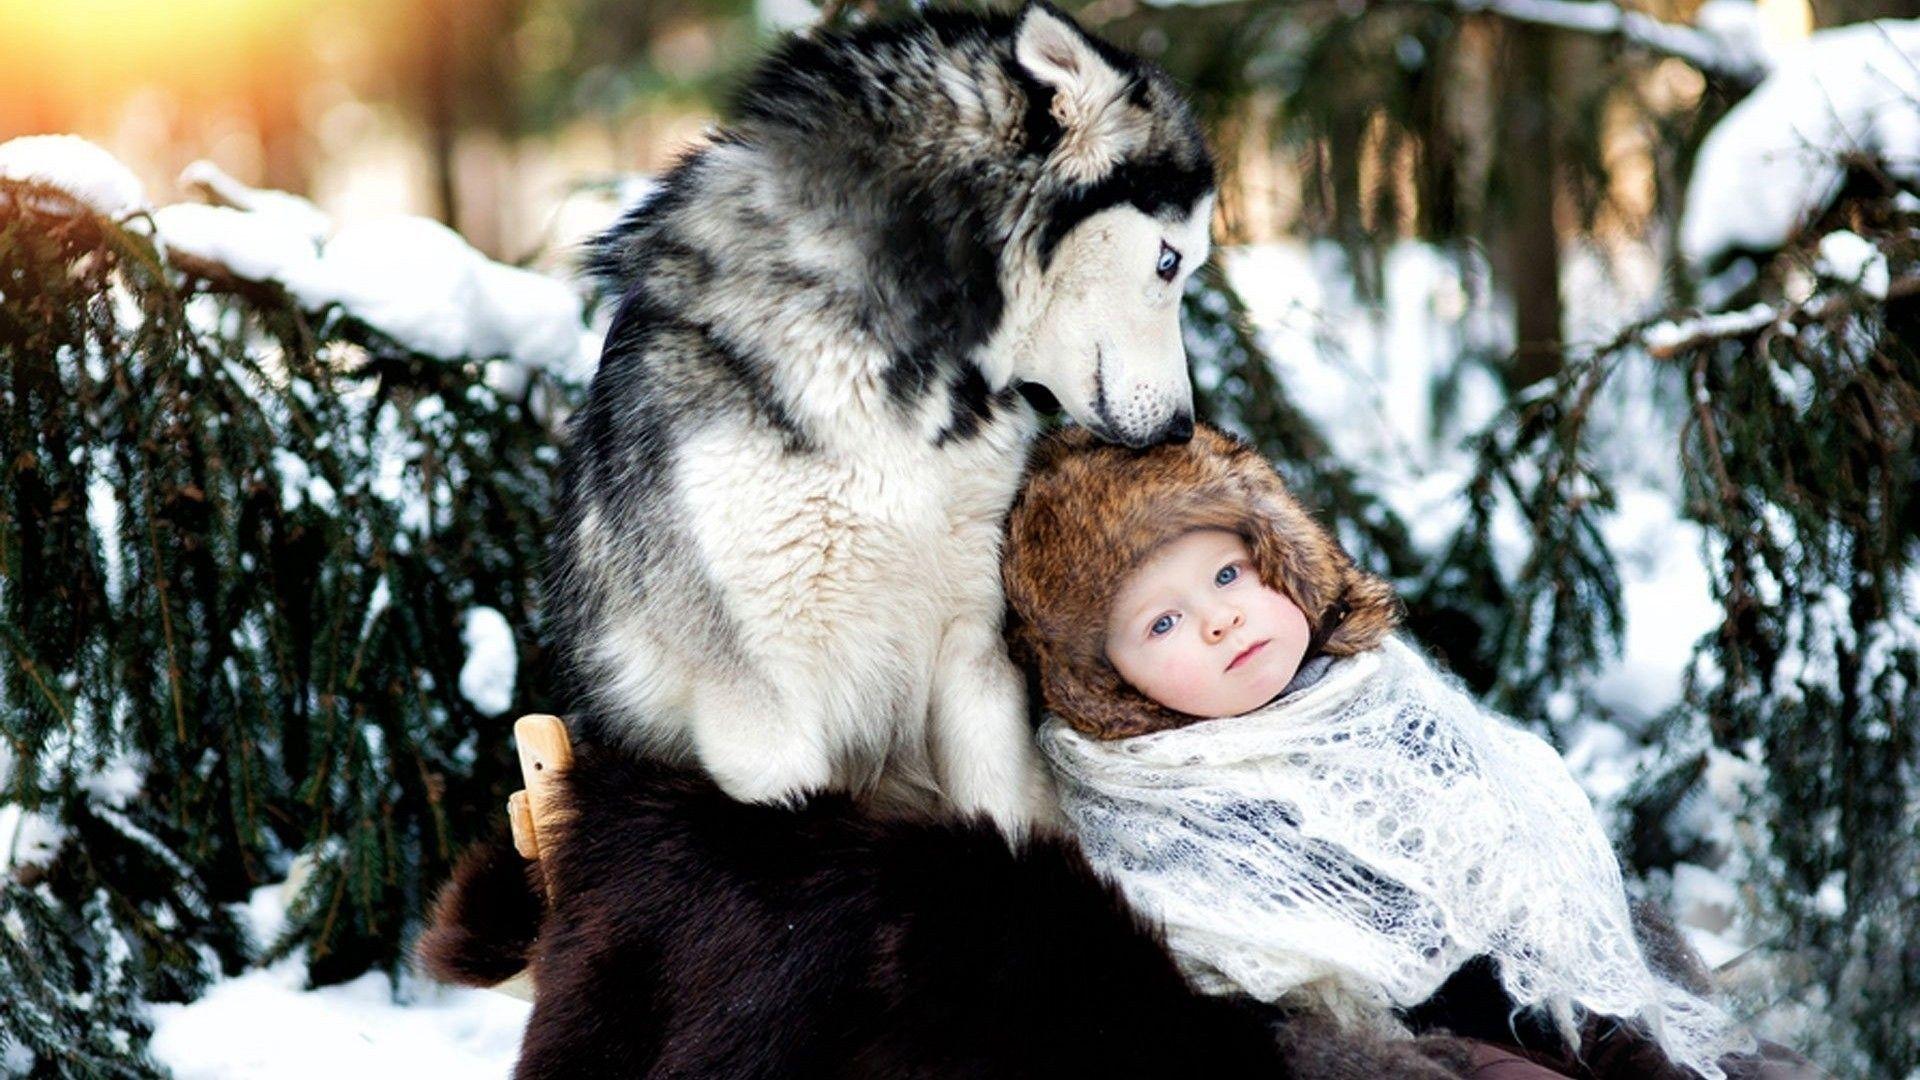 Download Wallpaper 1920x1080 Dog, Husky, Baby, Care, Forest, Snow